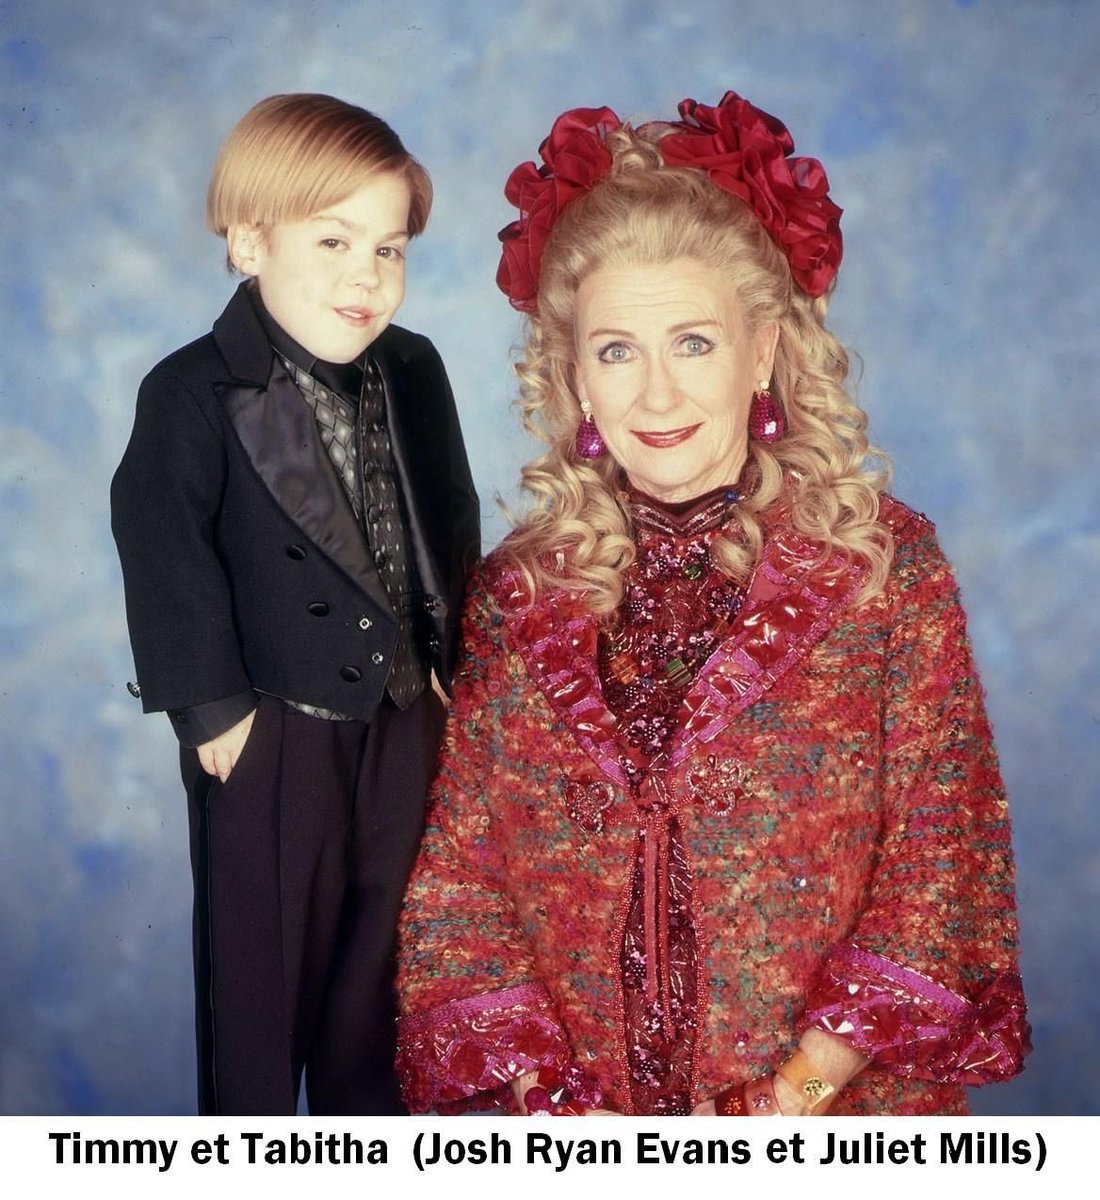 Passions is about the lives and loves of a group of characters in a town called Harmony. Central to this is the town witch Tabitha Lenox and her DOLL THAT SHE BROUGHT TO LIFE: Timmy.